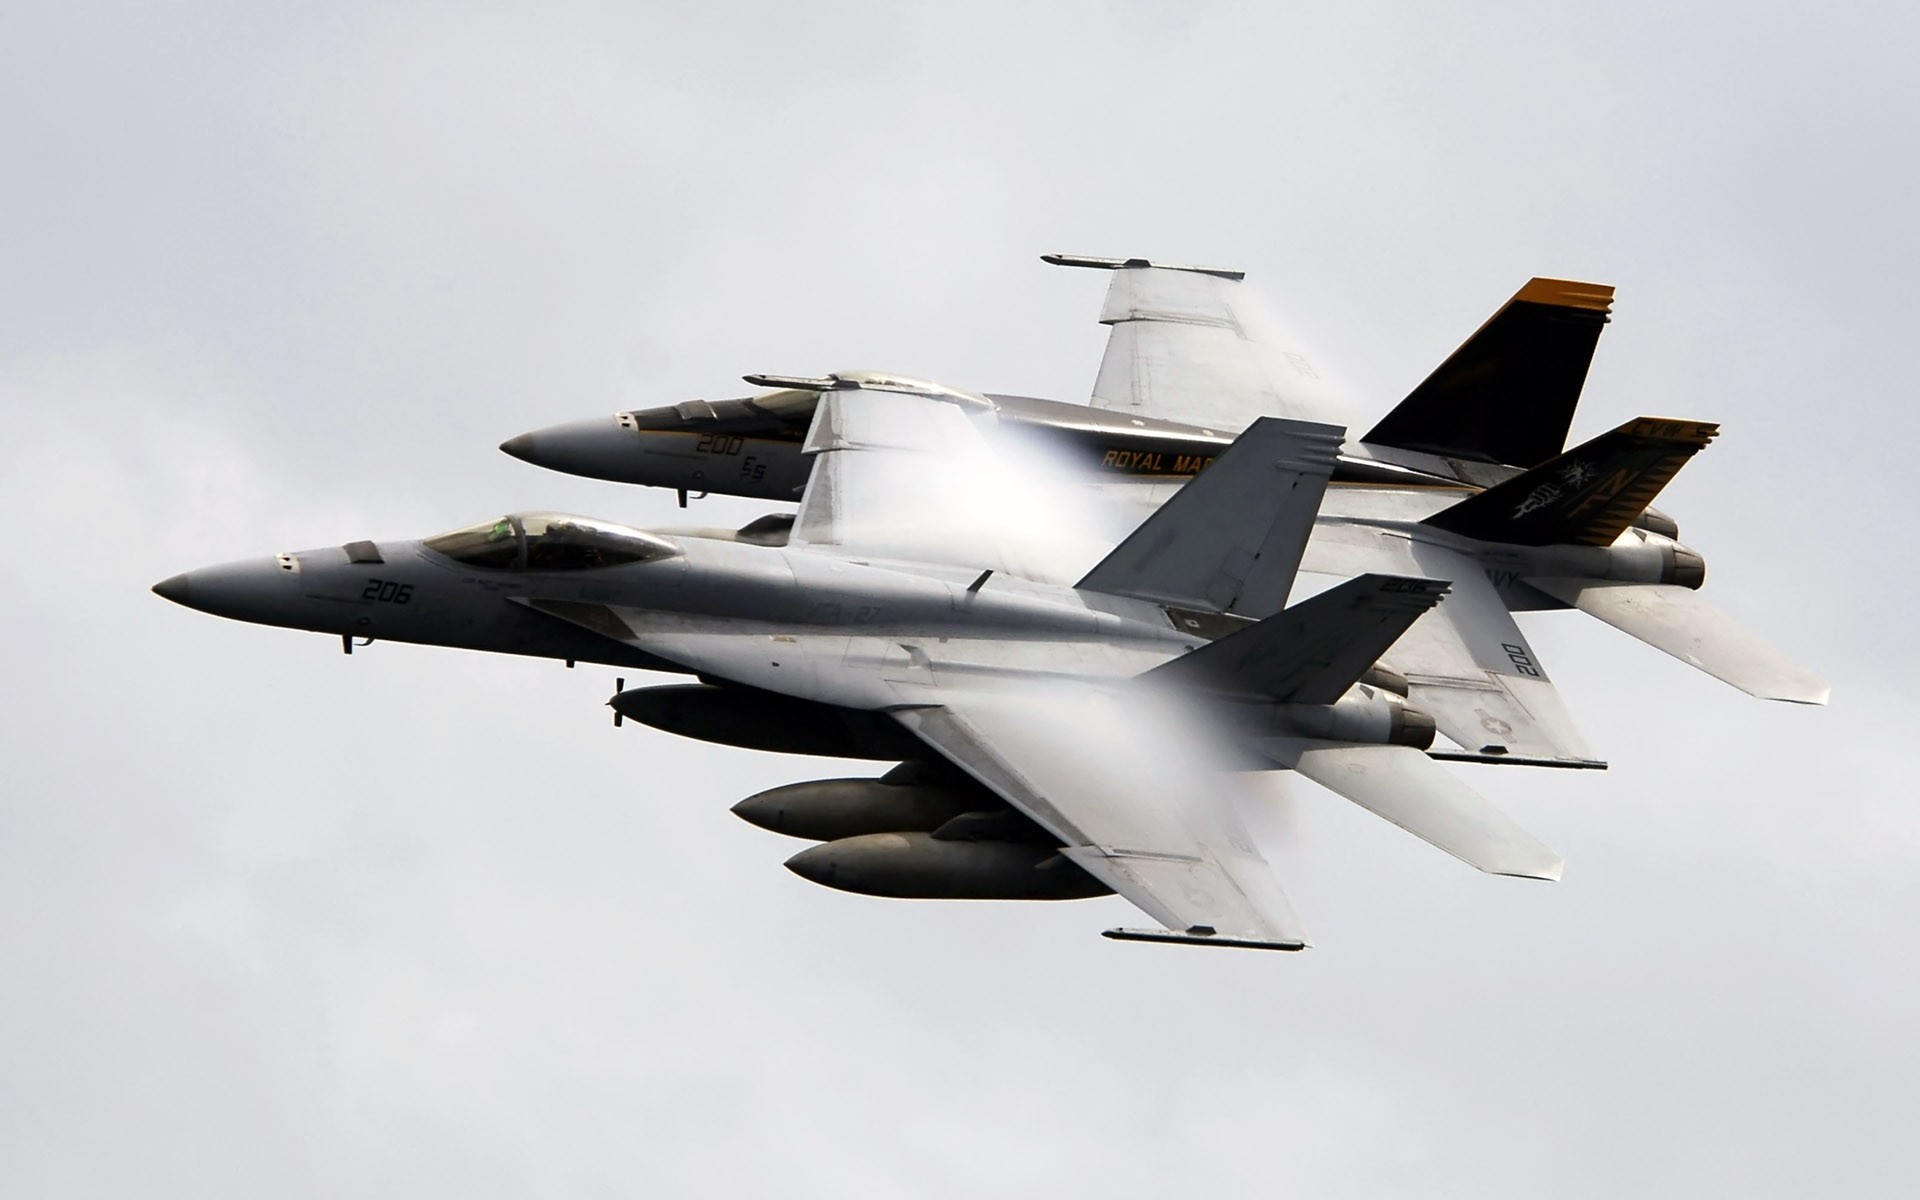 General 1920x1200 airplane McDonnell Douglas F/A-18 Hornet aircraft military vehicle military aircraft military vehicle